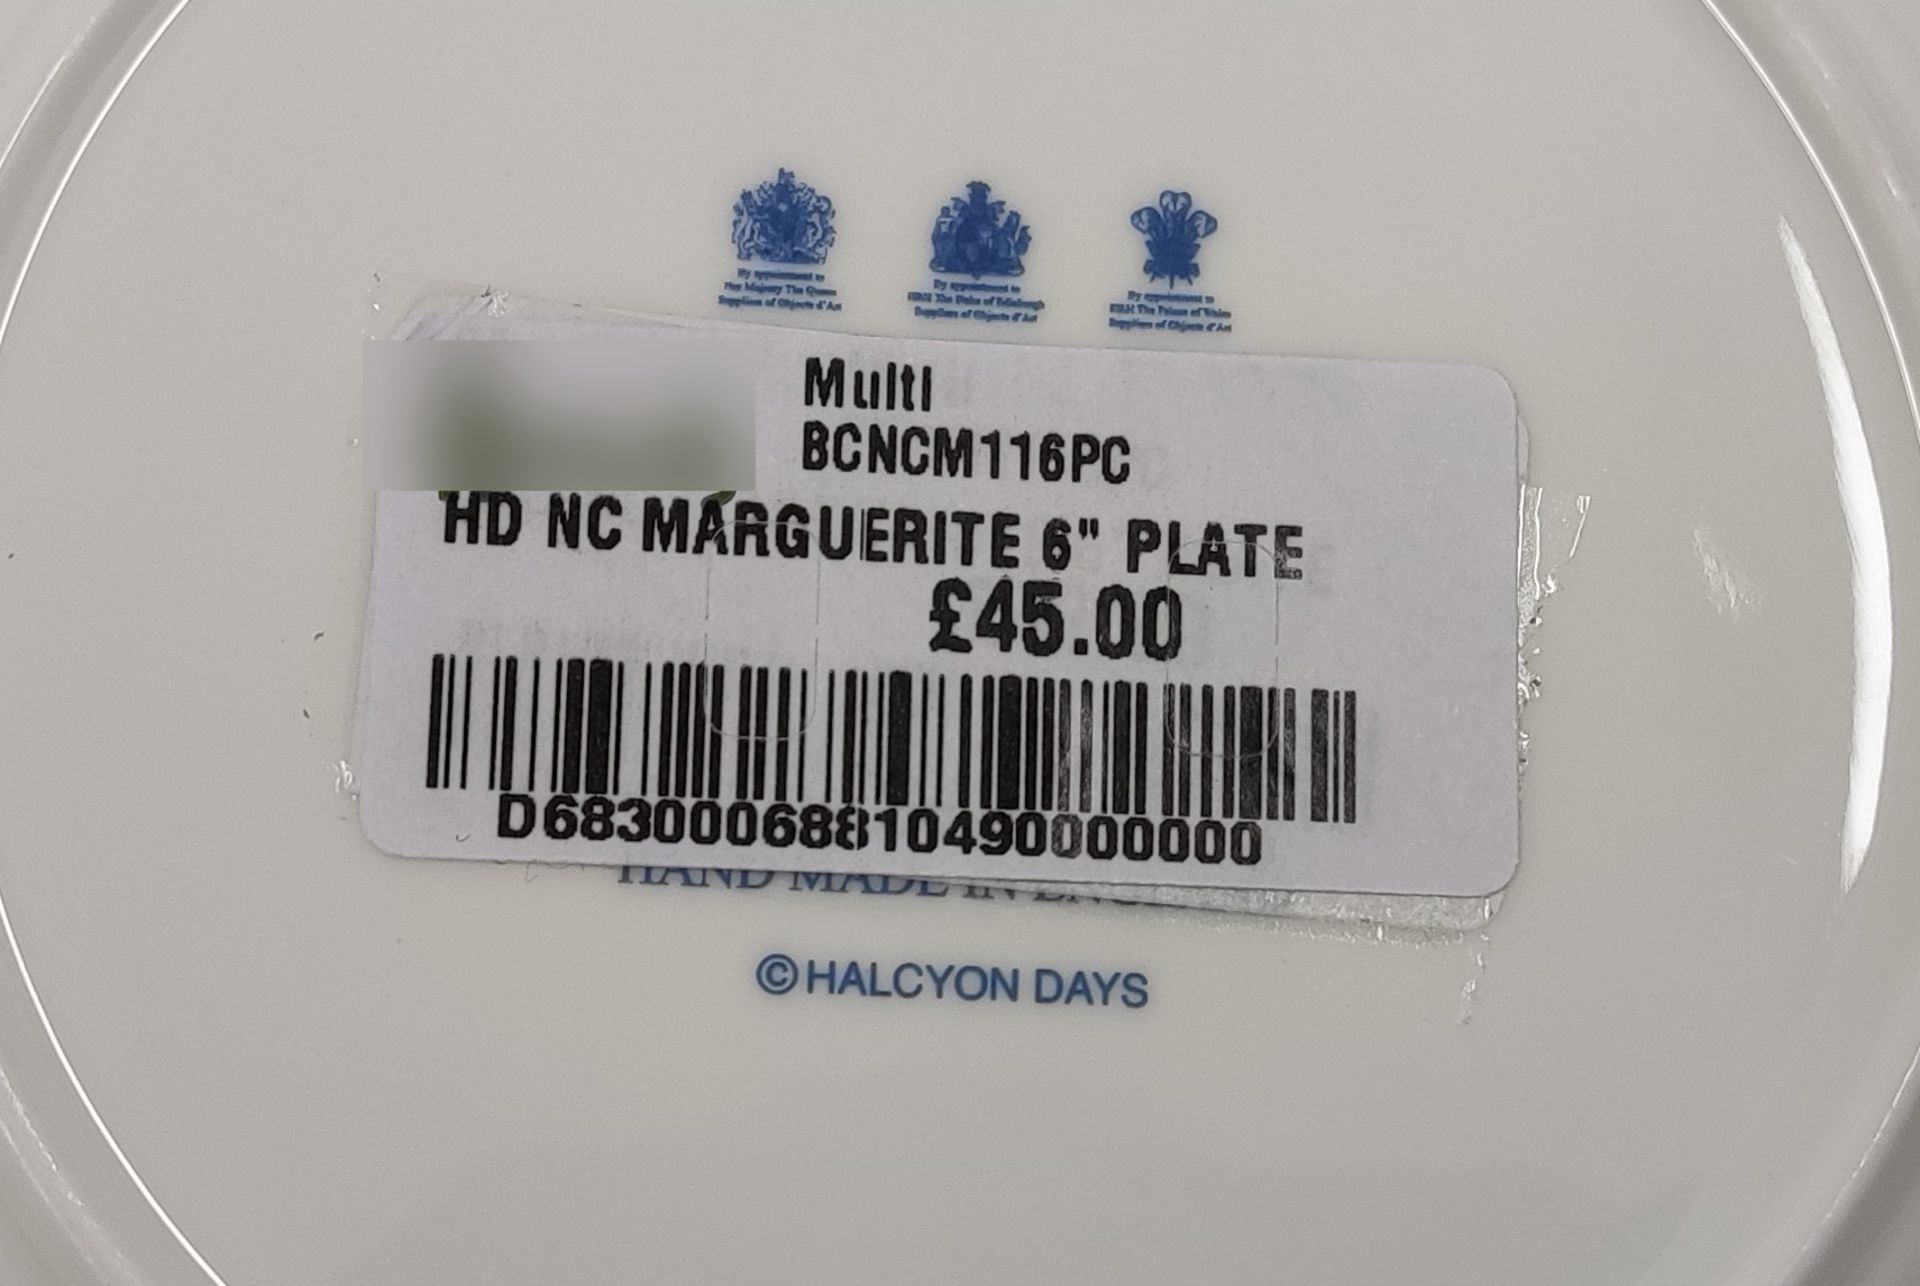 1 x HALCYON DAYS Nina Campbell Marguerite 6" Side Plate - New/Boxed - Original RRP £59.00 - Image 10 of 10